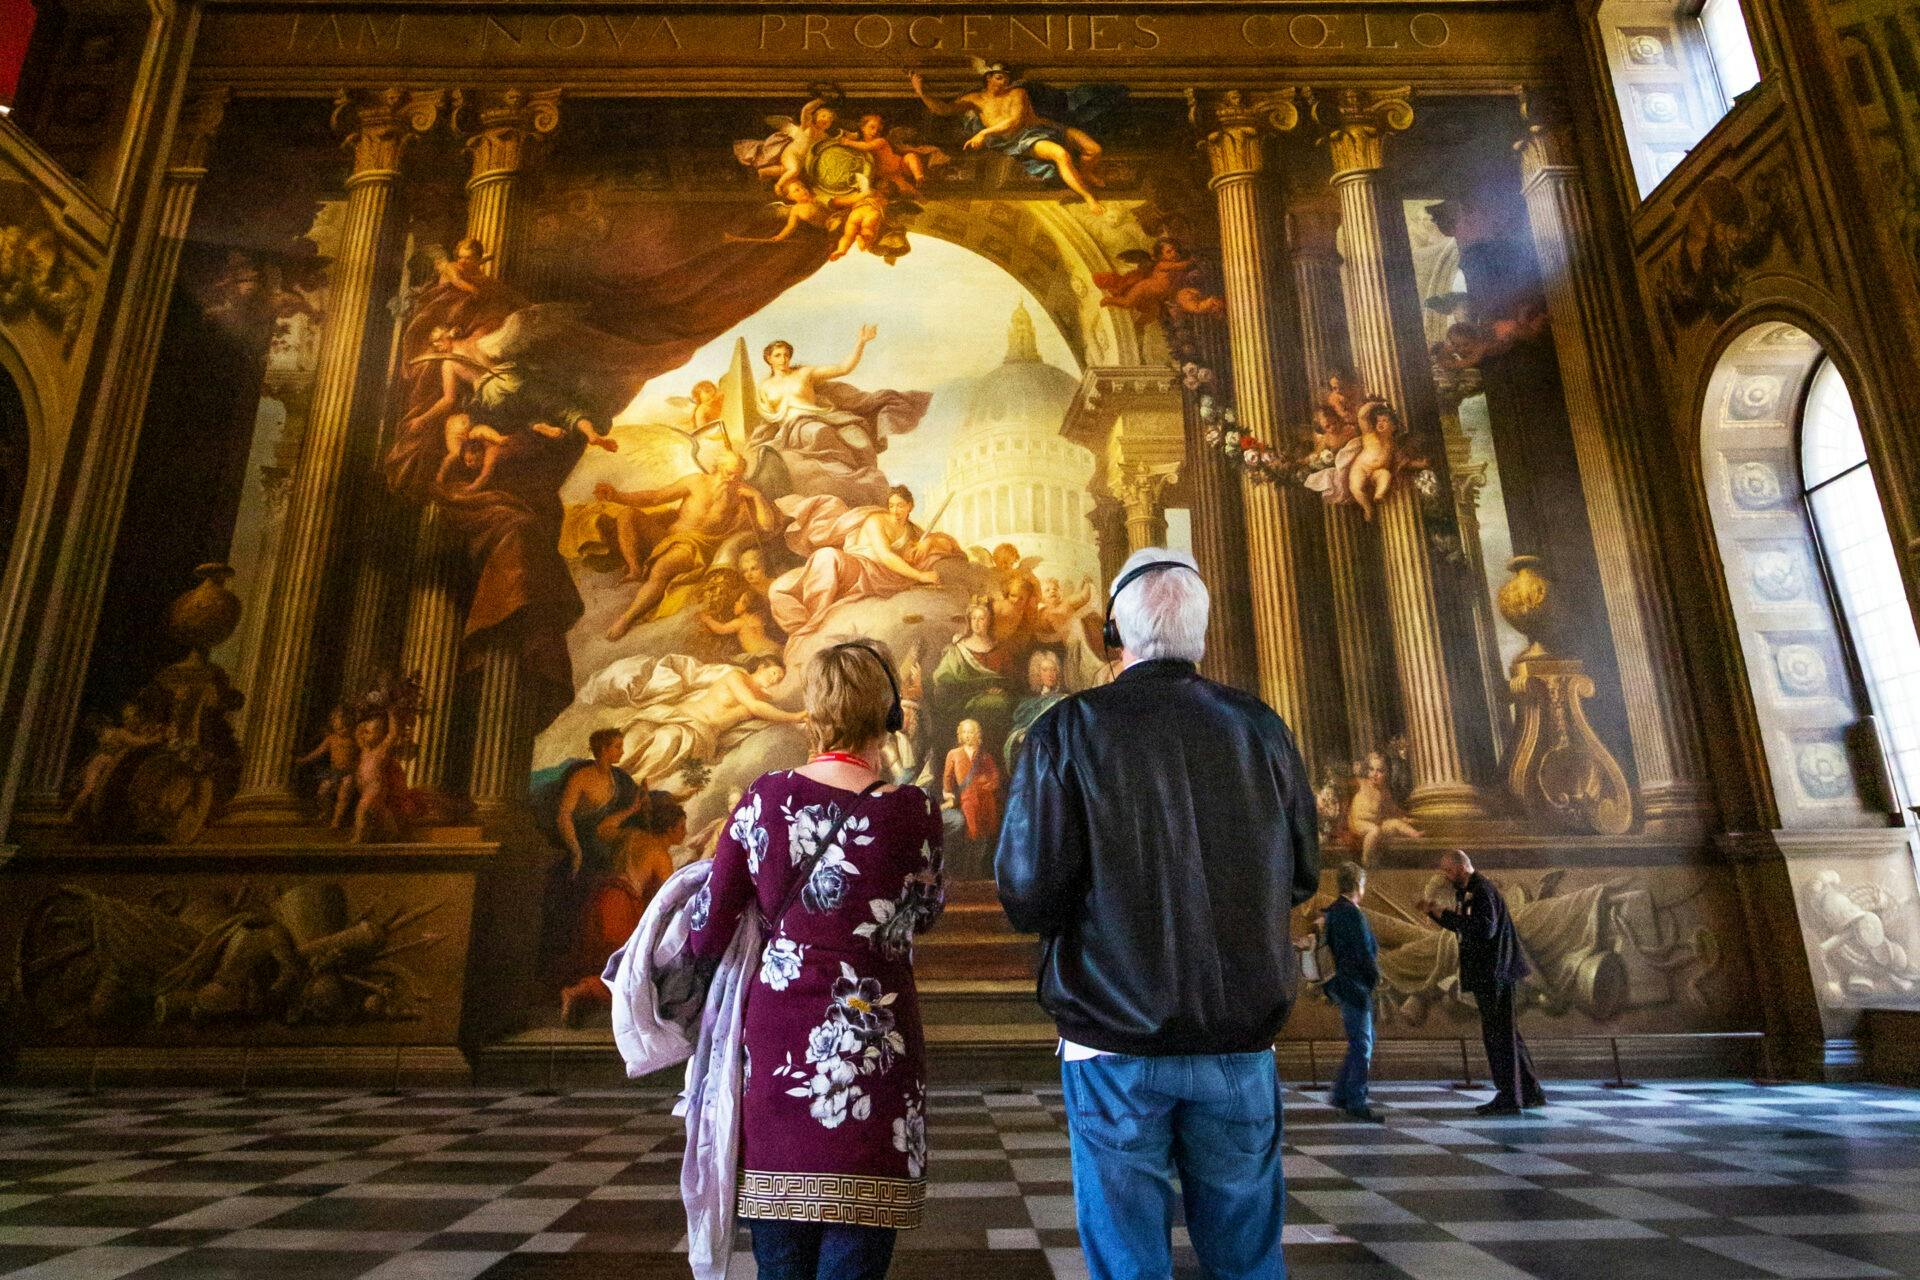 The Painted Hall, Old Royal Naval College